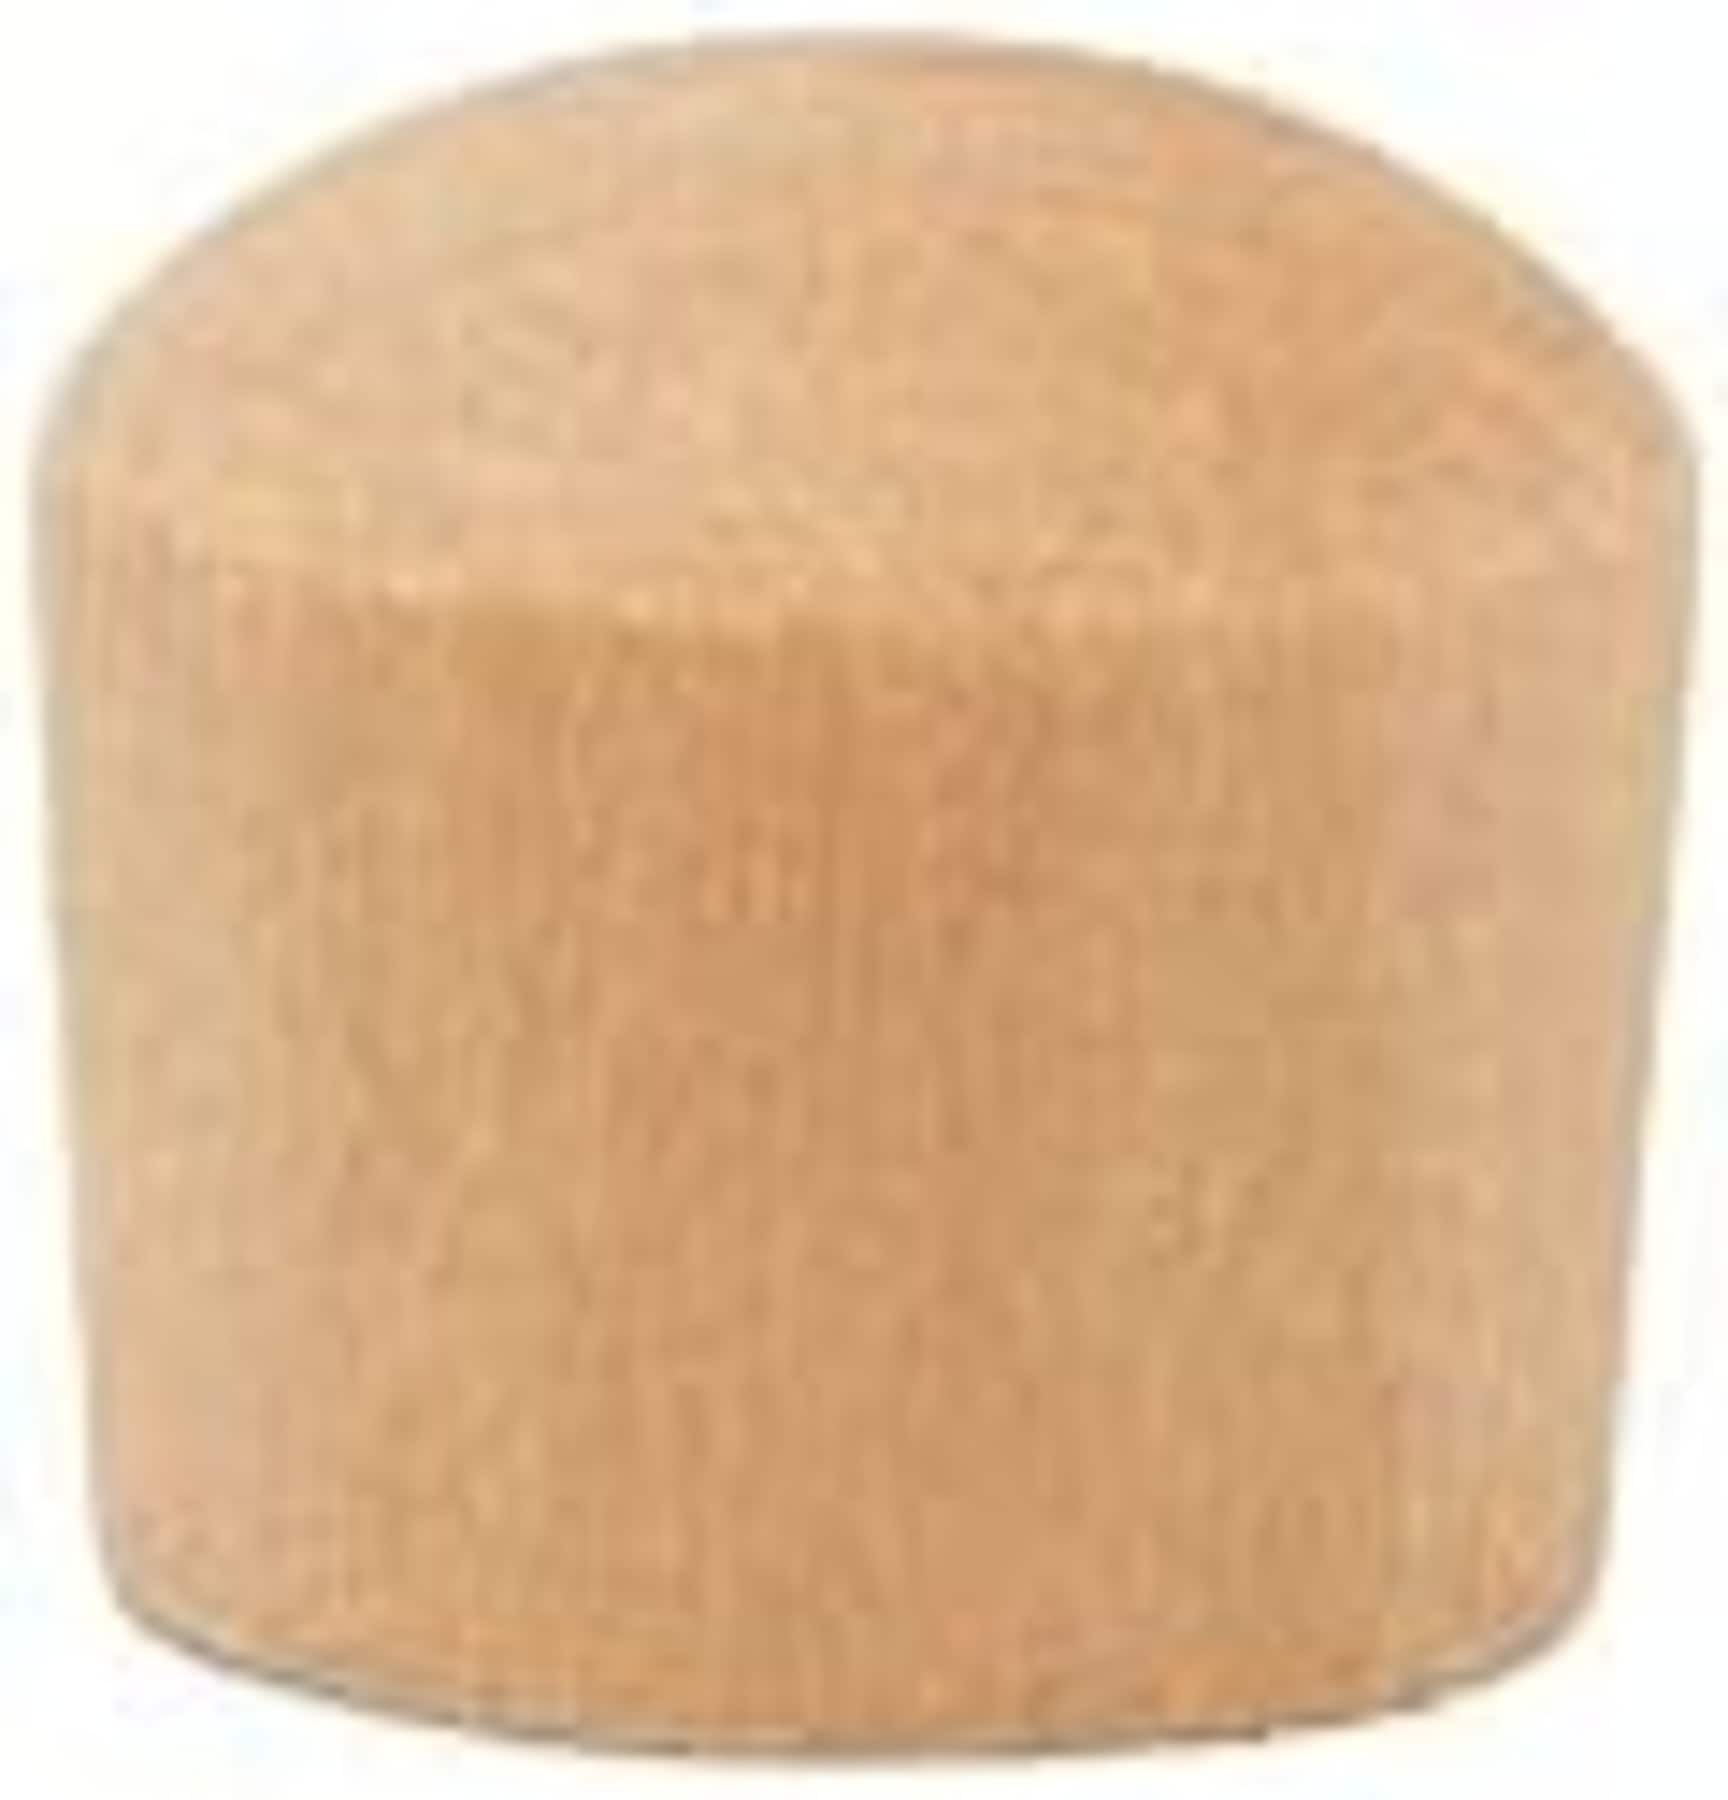 Woodpeckers Crafts Baltic Birch Plywood, 3 mm 1/8 x 18 x 24 in. Craft Wood, Box of 4 B/bb in Brown | MF-PLY-18-24-18-P4